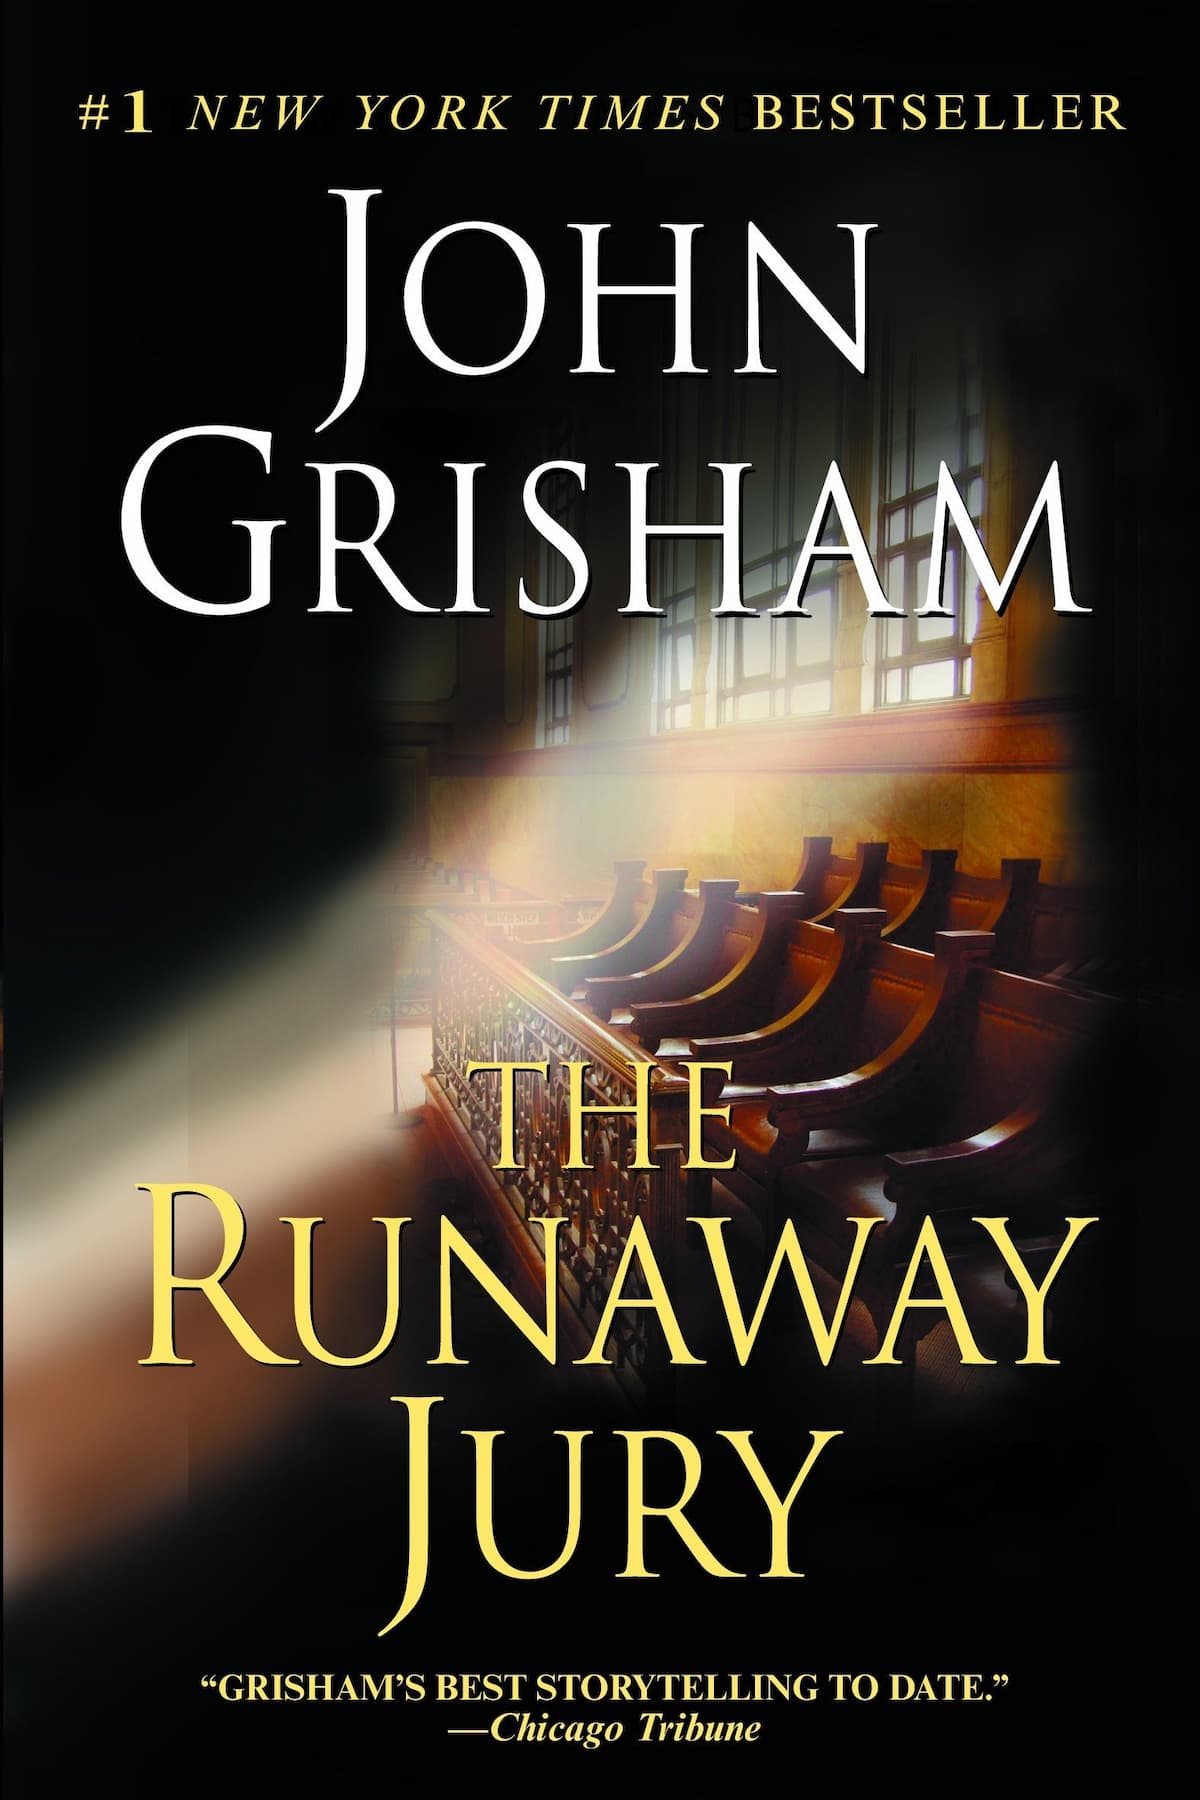 The Runaway Jury – Colleen Hoover: I am going to provide you an honest review of The Runaway Jury.